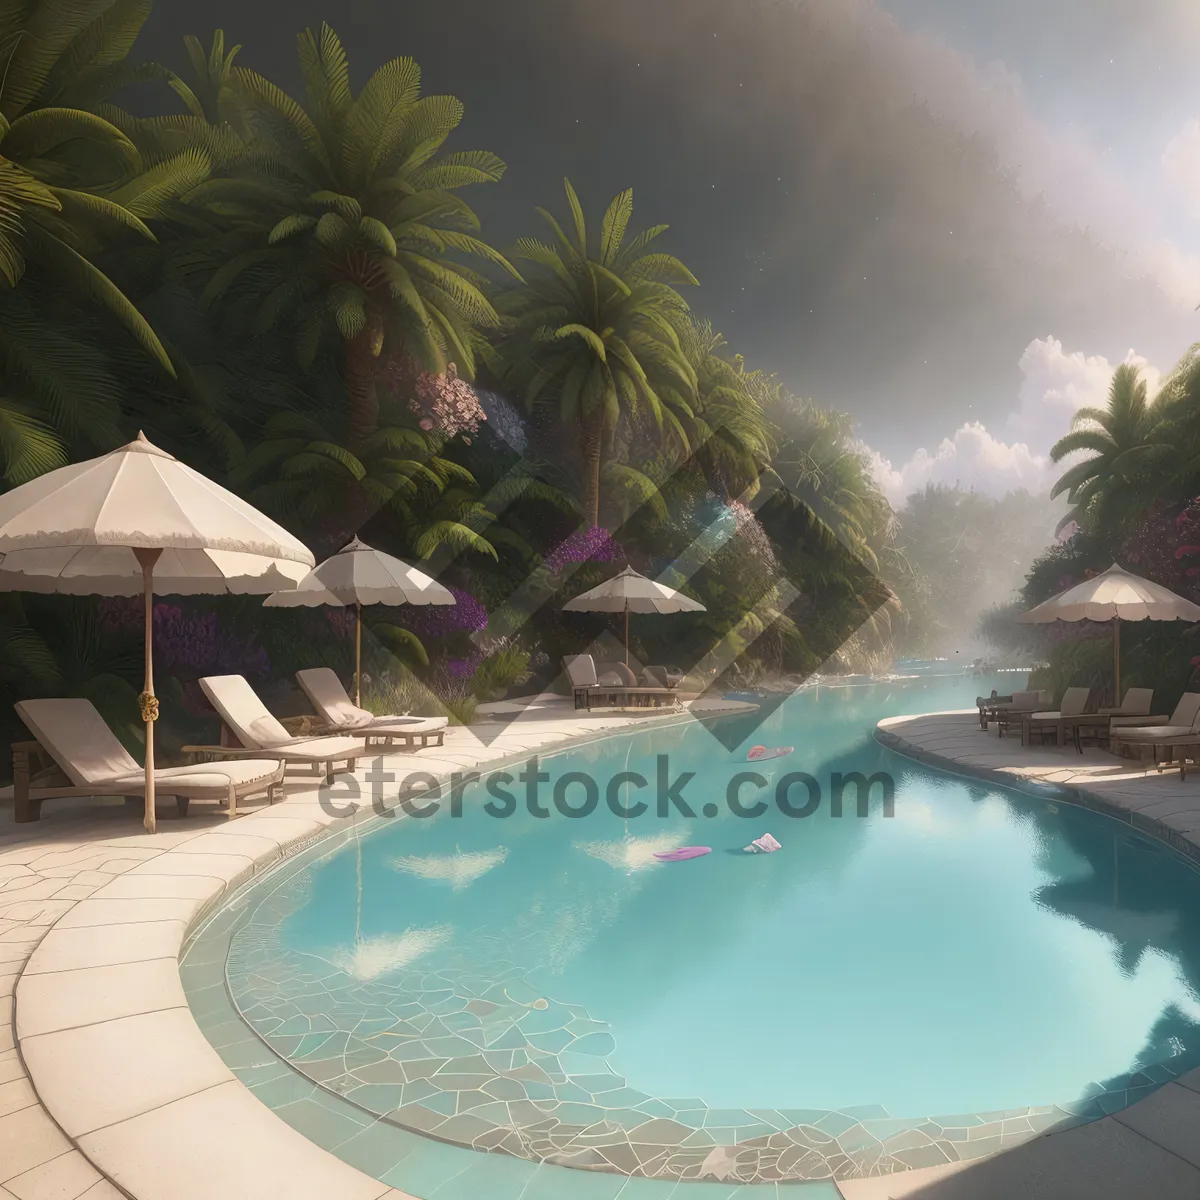 Picture of Tropical Paradise: Luxury Resort Pool by the Beach